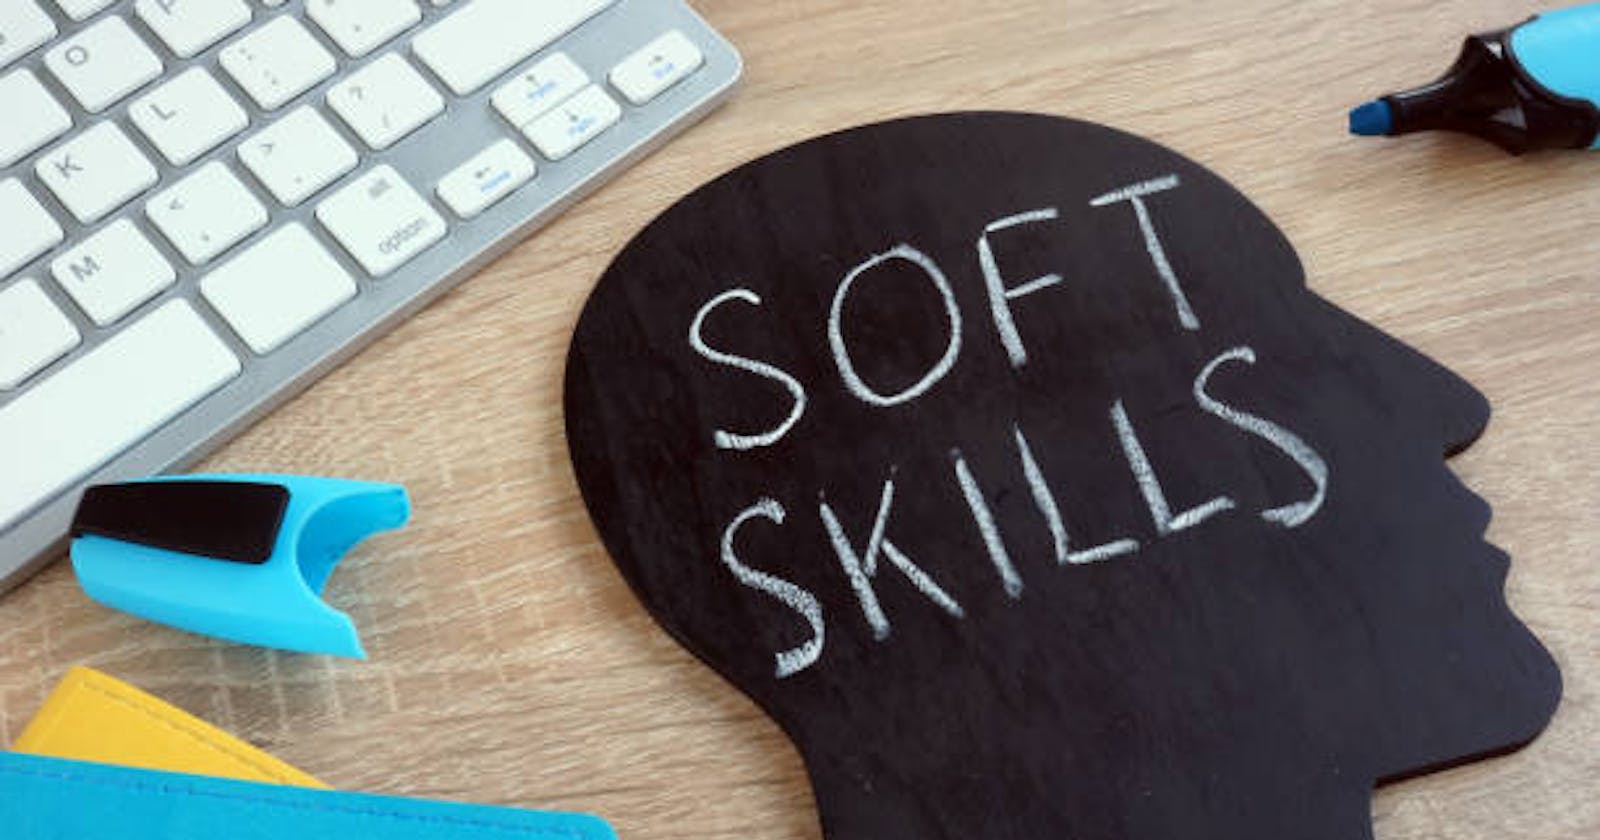 Crucial soft skills in today's workforce